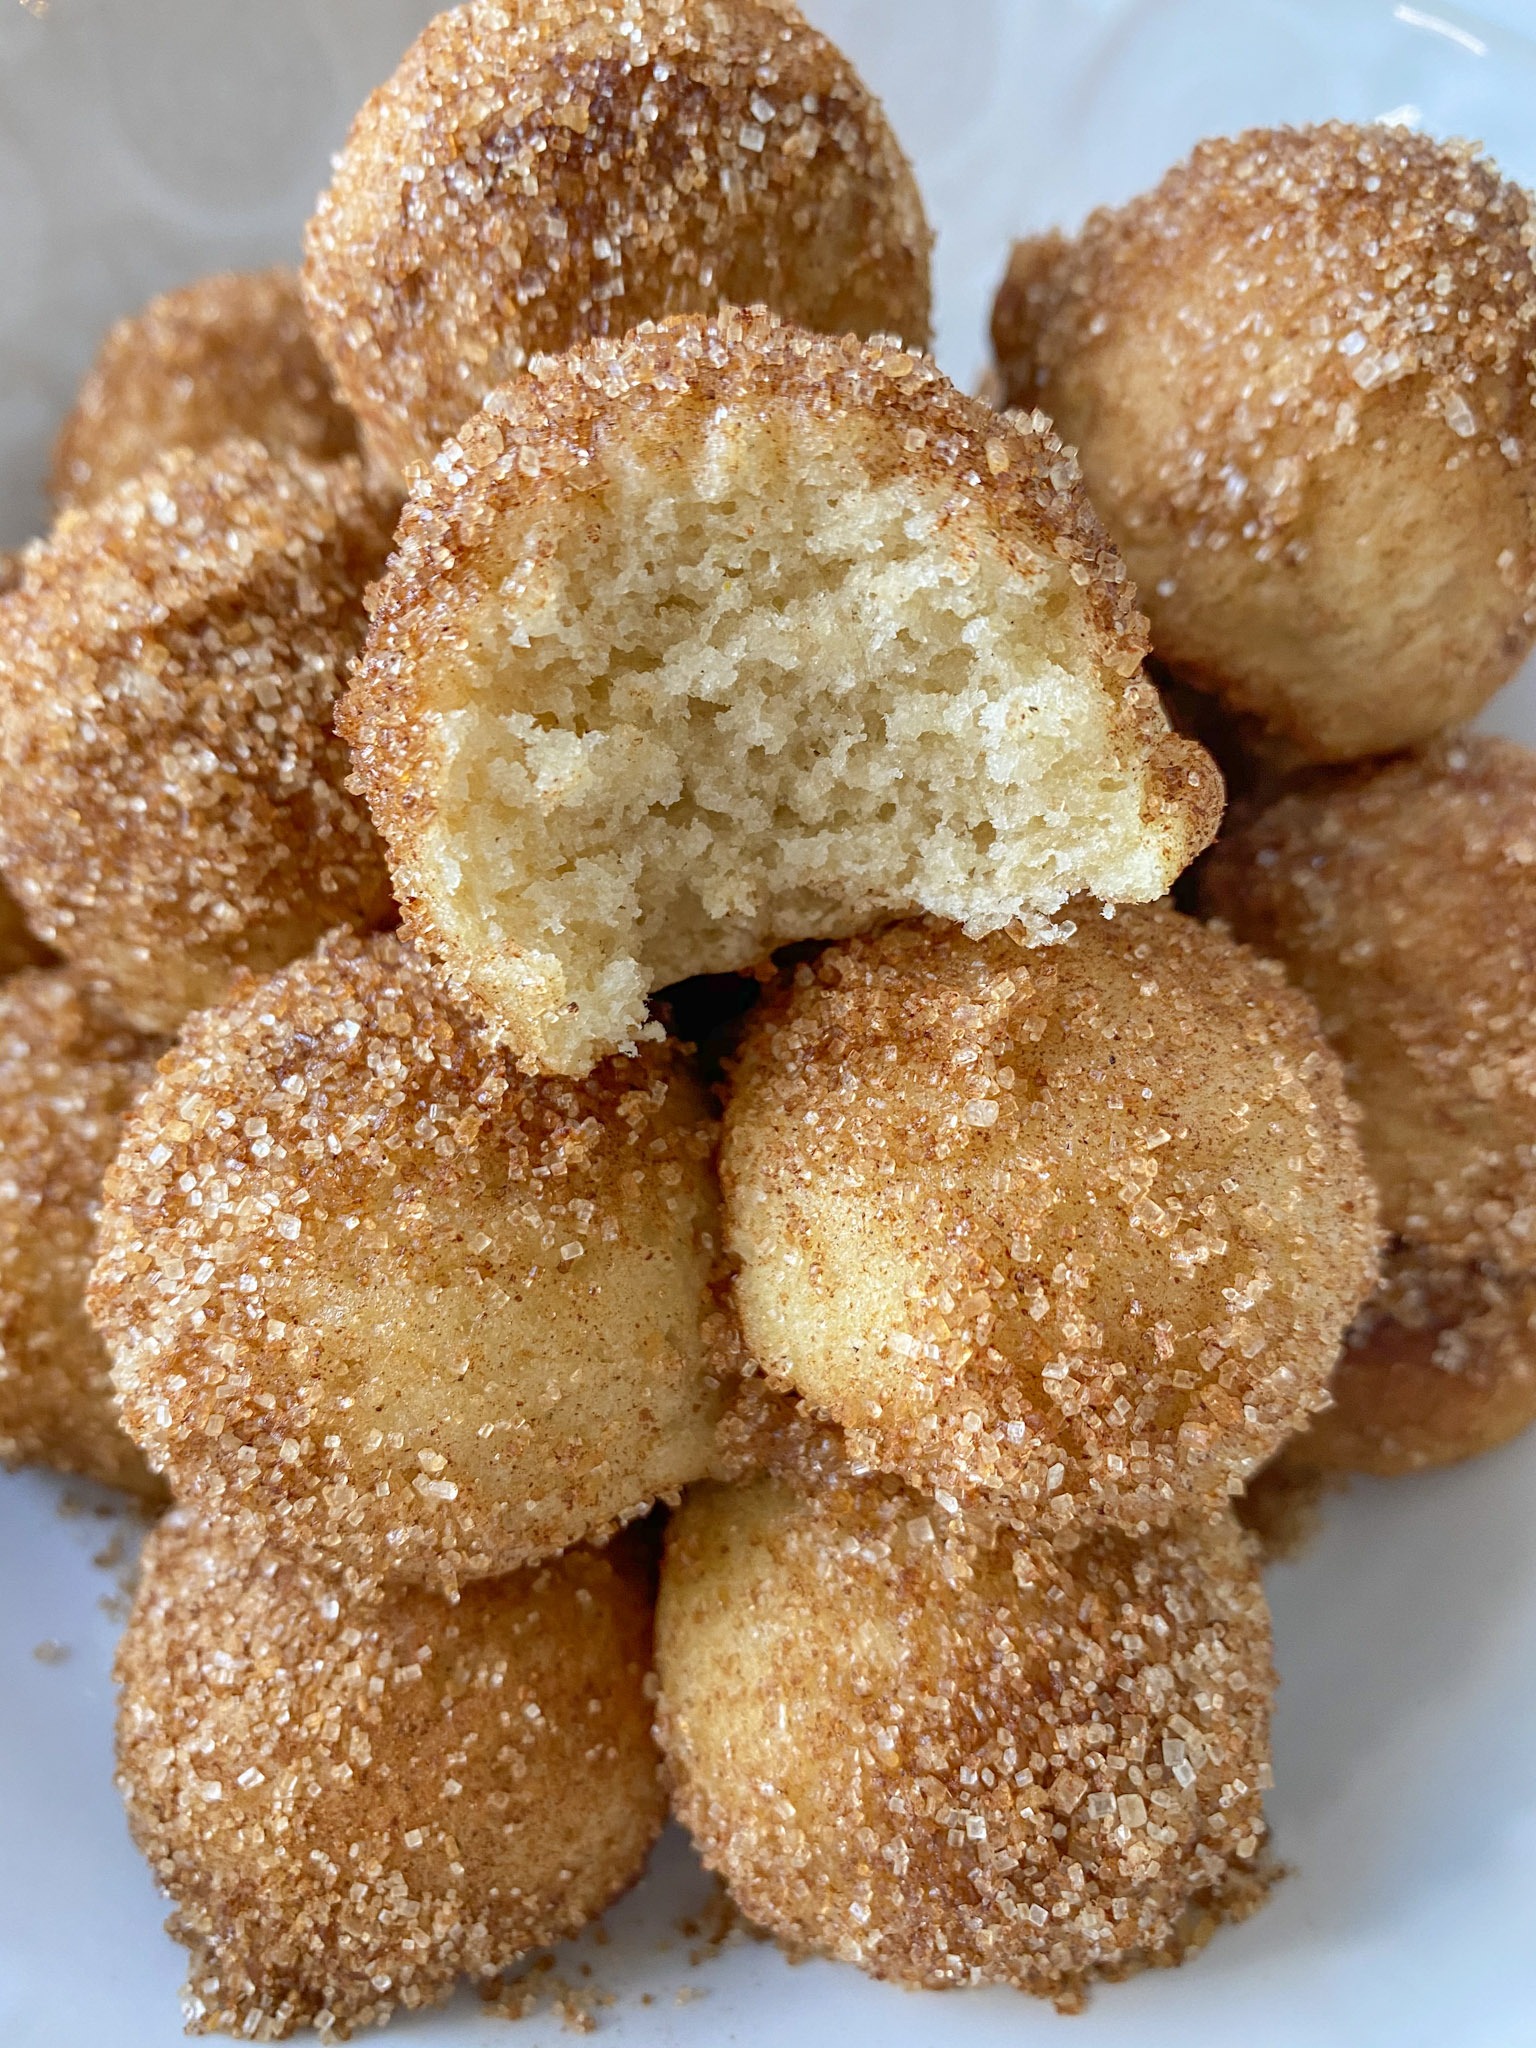 cinnamon sugar donut holes stacked on a plate with the top donut hole missing a bite.